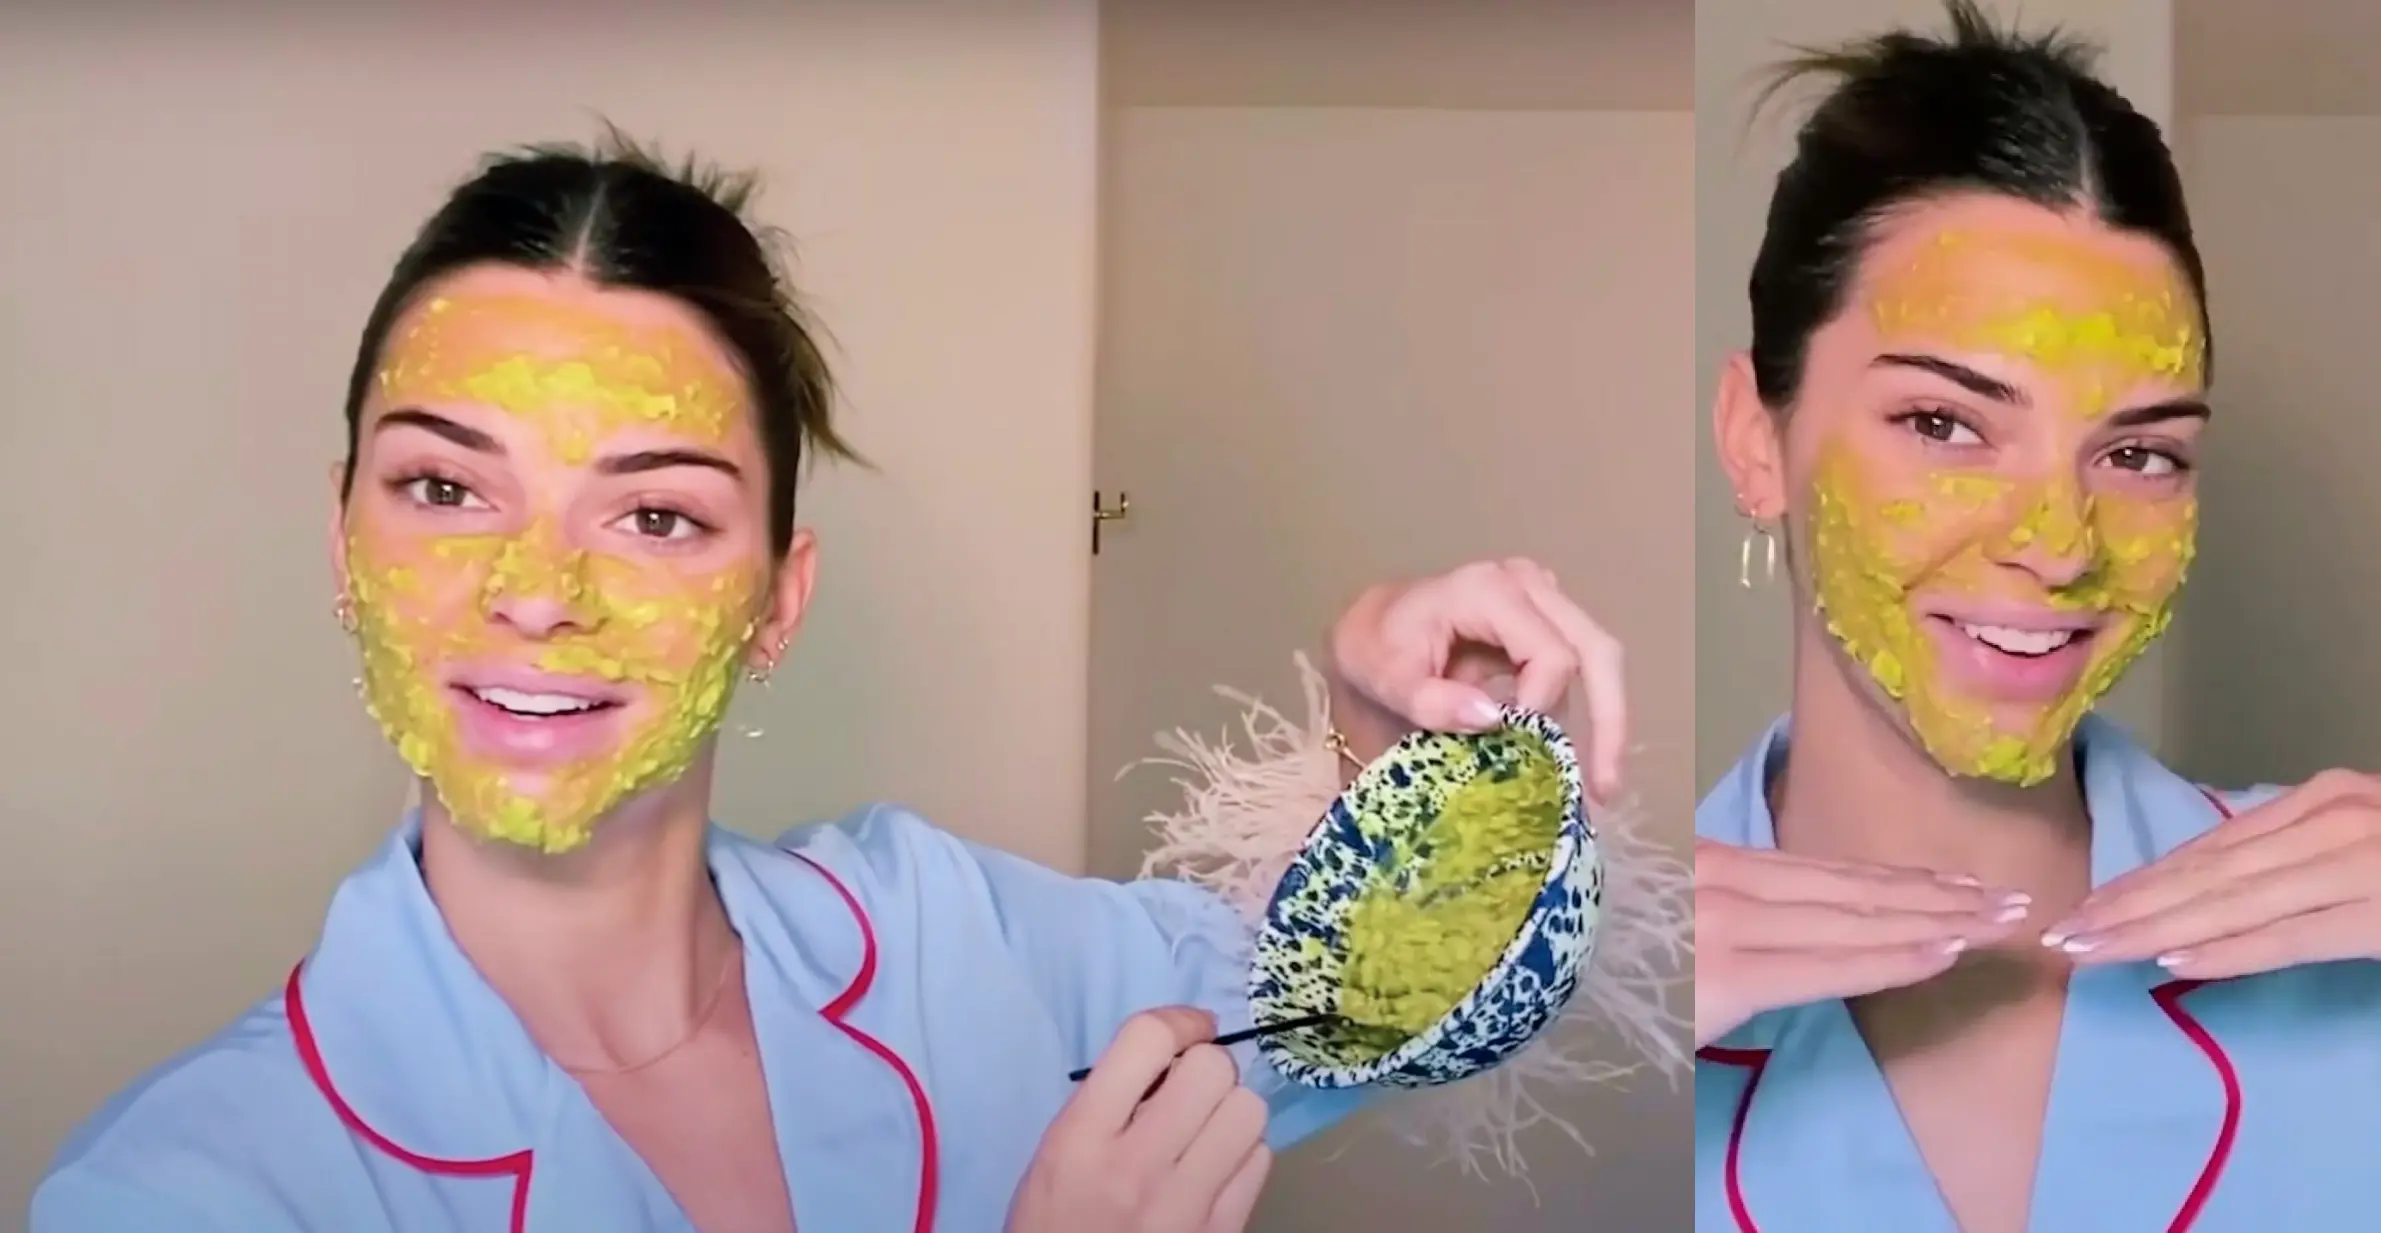 Trying Kendall Jenner’s Avocado Face Mask Recipe